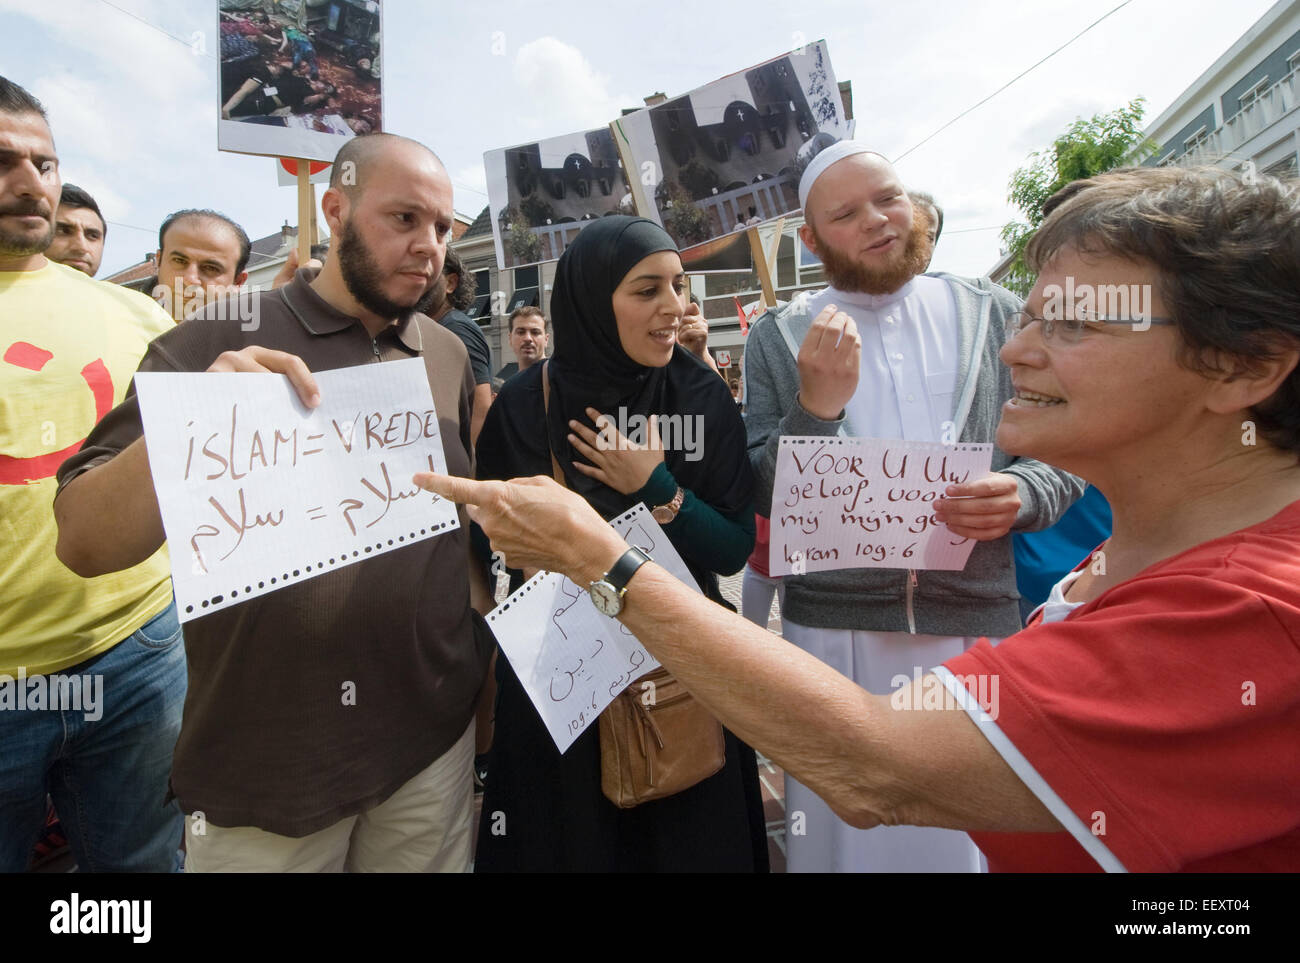 Discussion with muslims during a demonstration organized by suryoye christians against the slaughter of christians in Irak Stock Photo